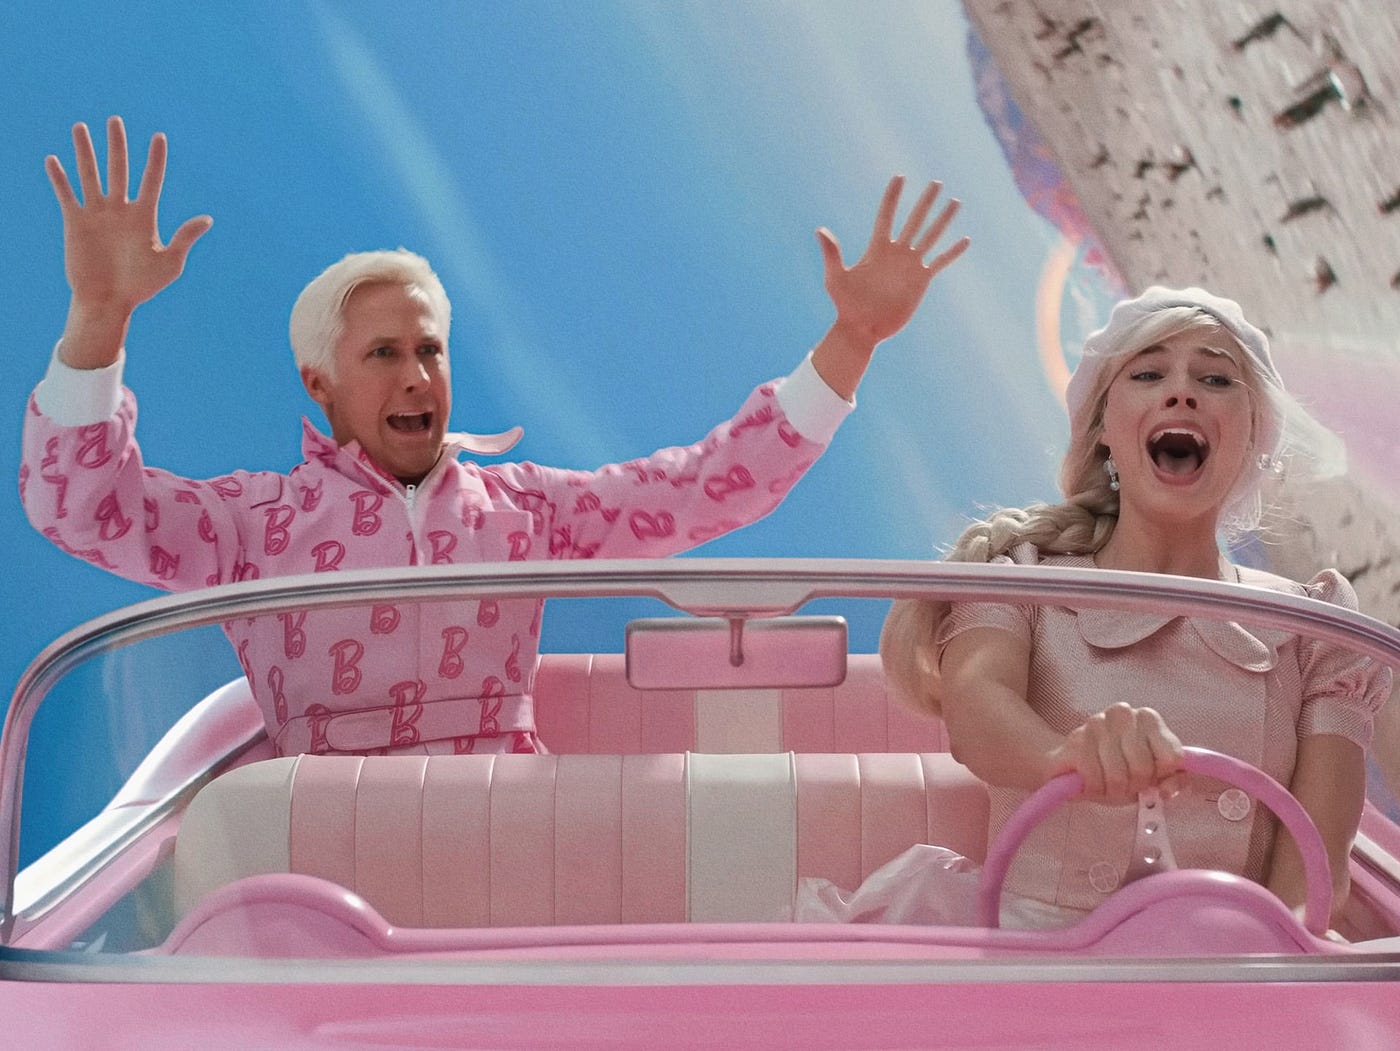 Where Was Barbie Filmed? (& Can You Visit?)